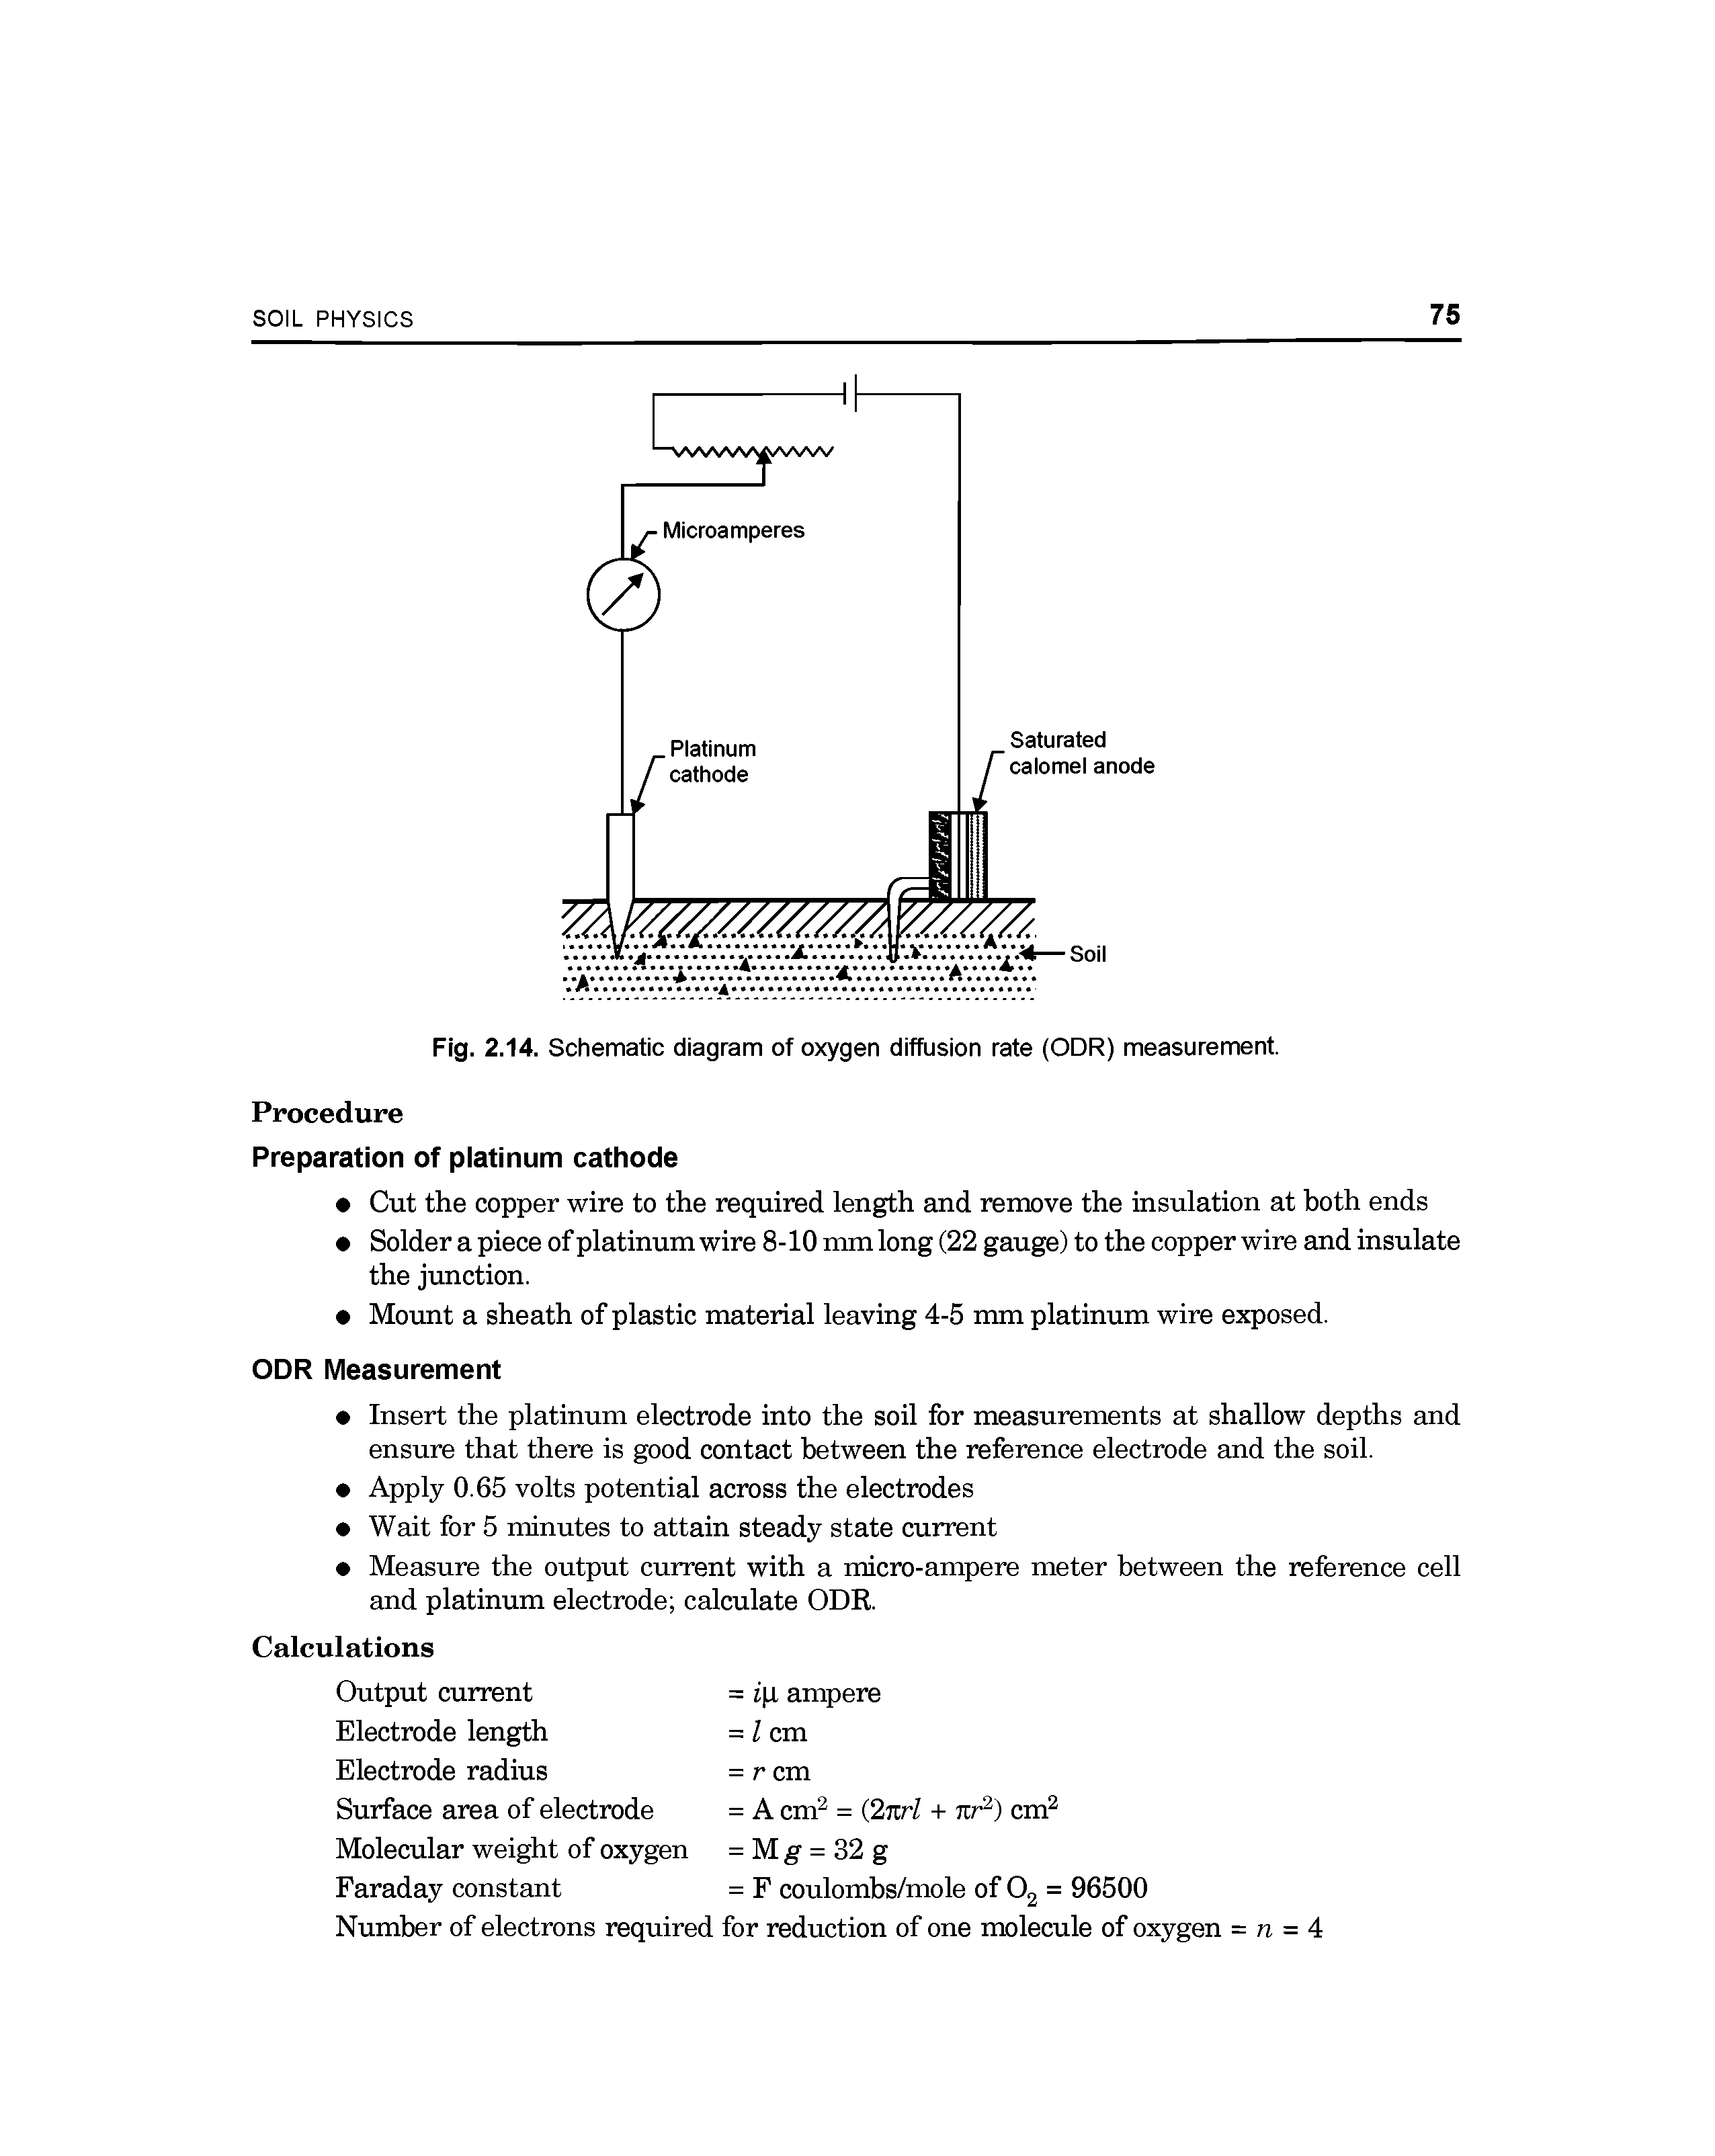 Fig. 2.14. Schematic diagram of oxygen diffusion rate (ODR) measurement.